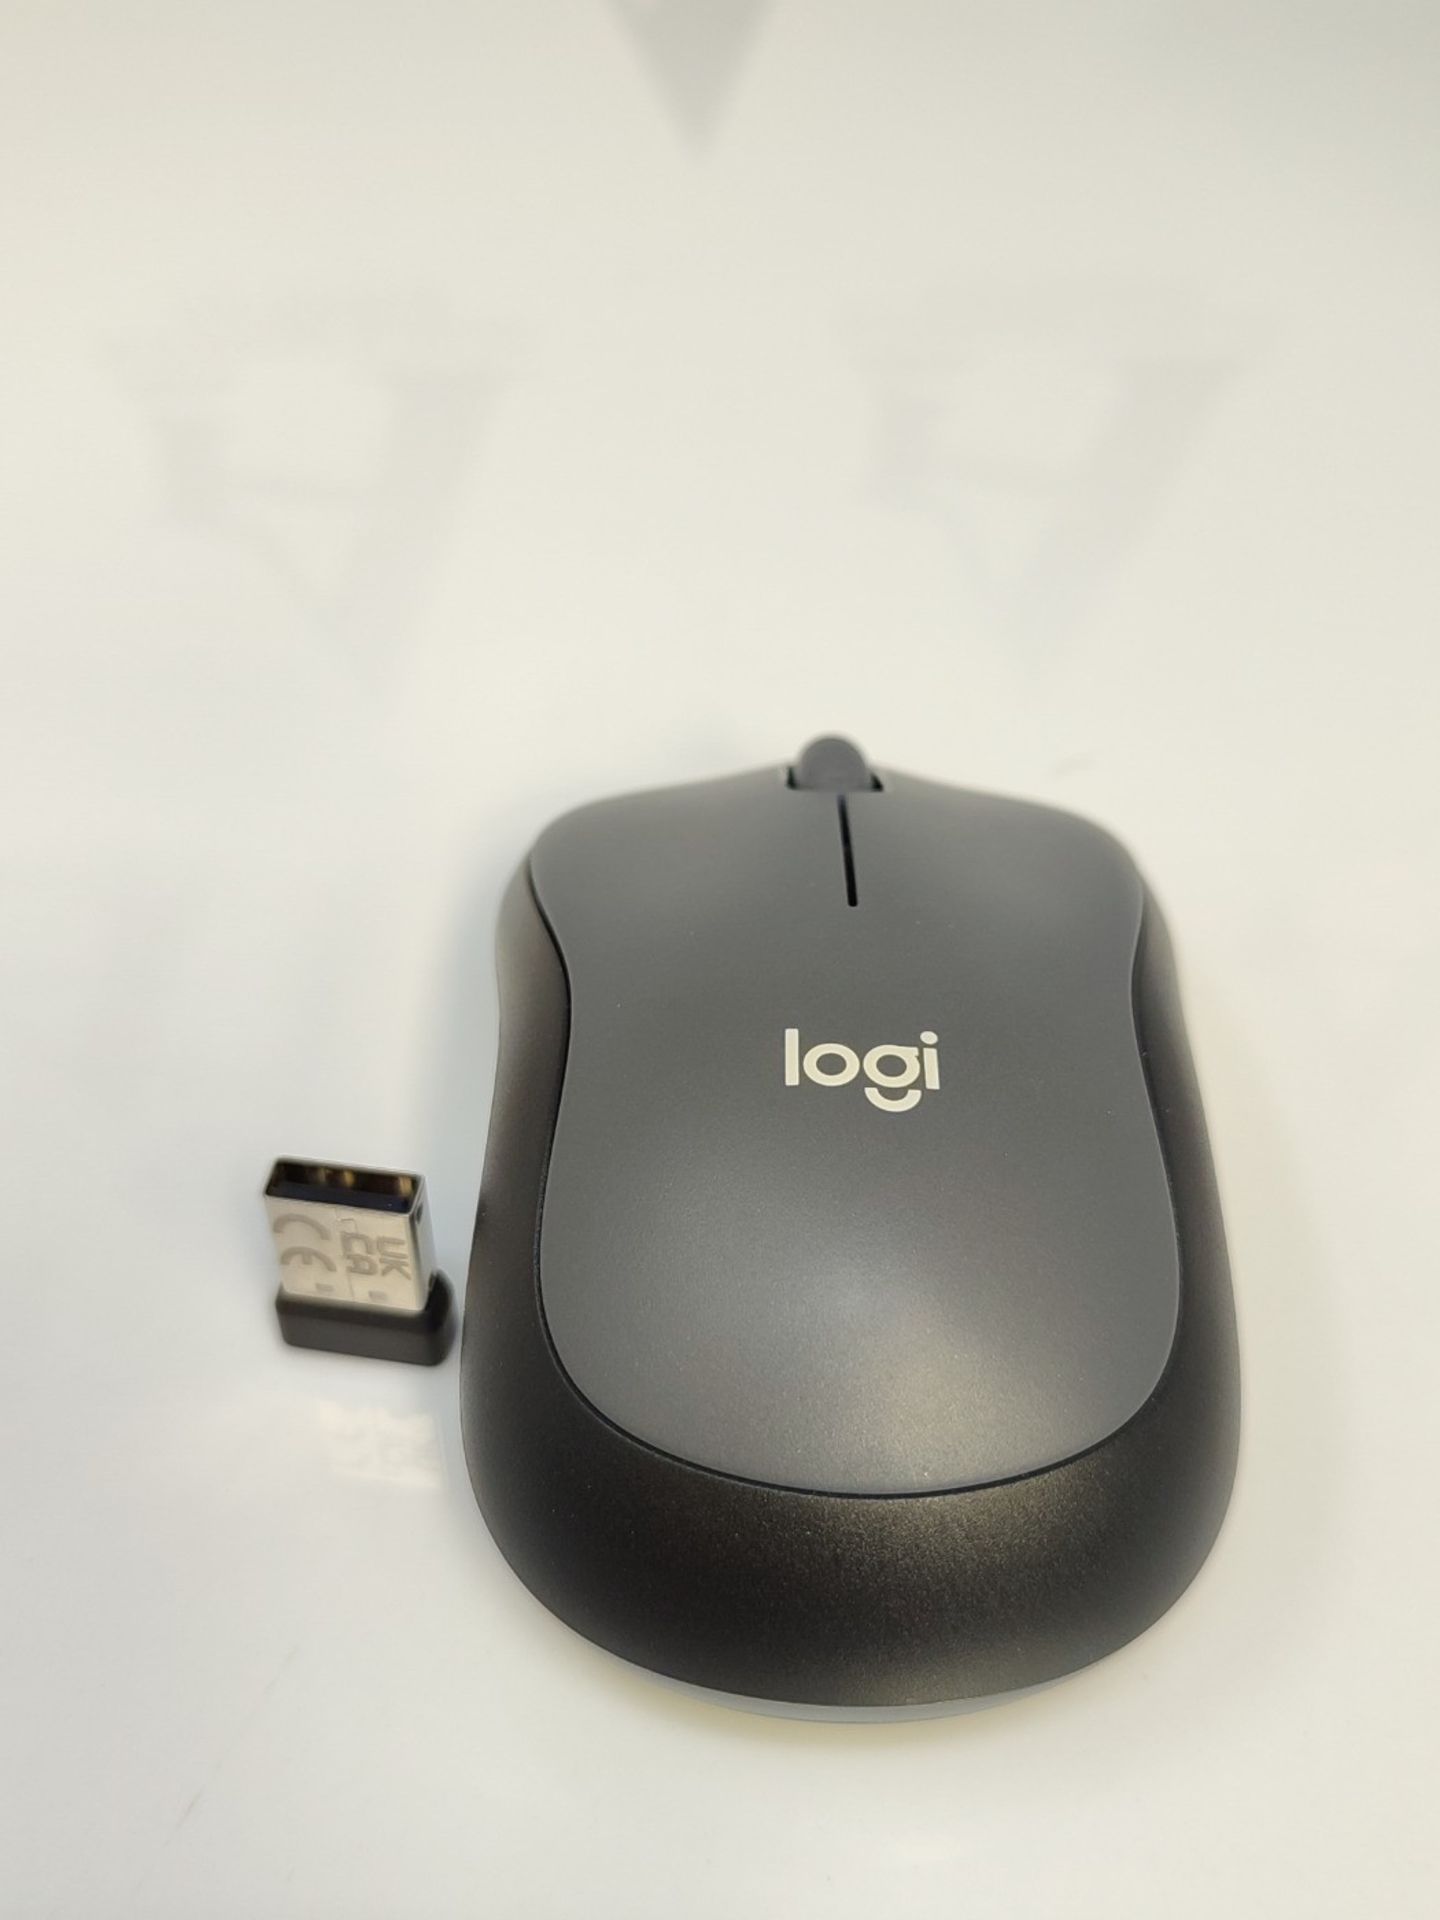 Logitech M220 SILENT Wireless Mouse, 2.4GHz with USB receiver, 1000 DPI Optical Tracki - Image 3 of 3